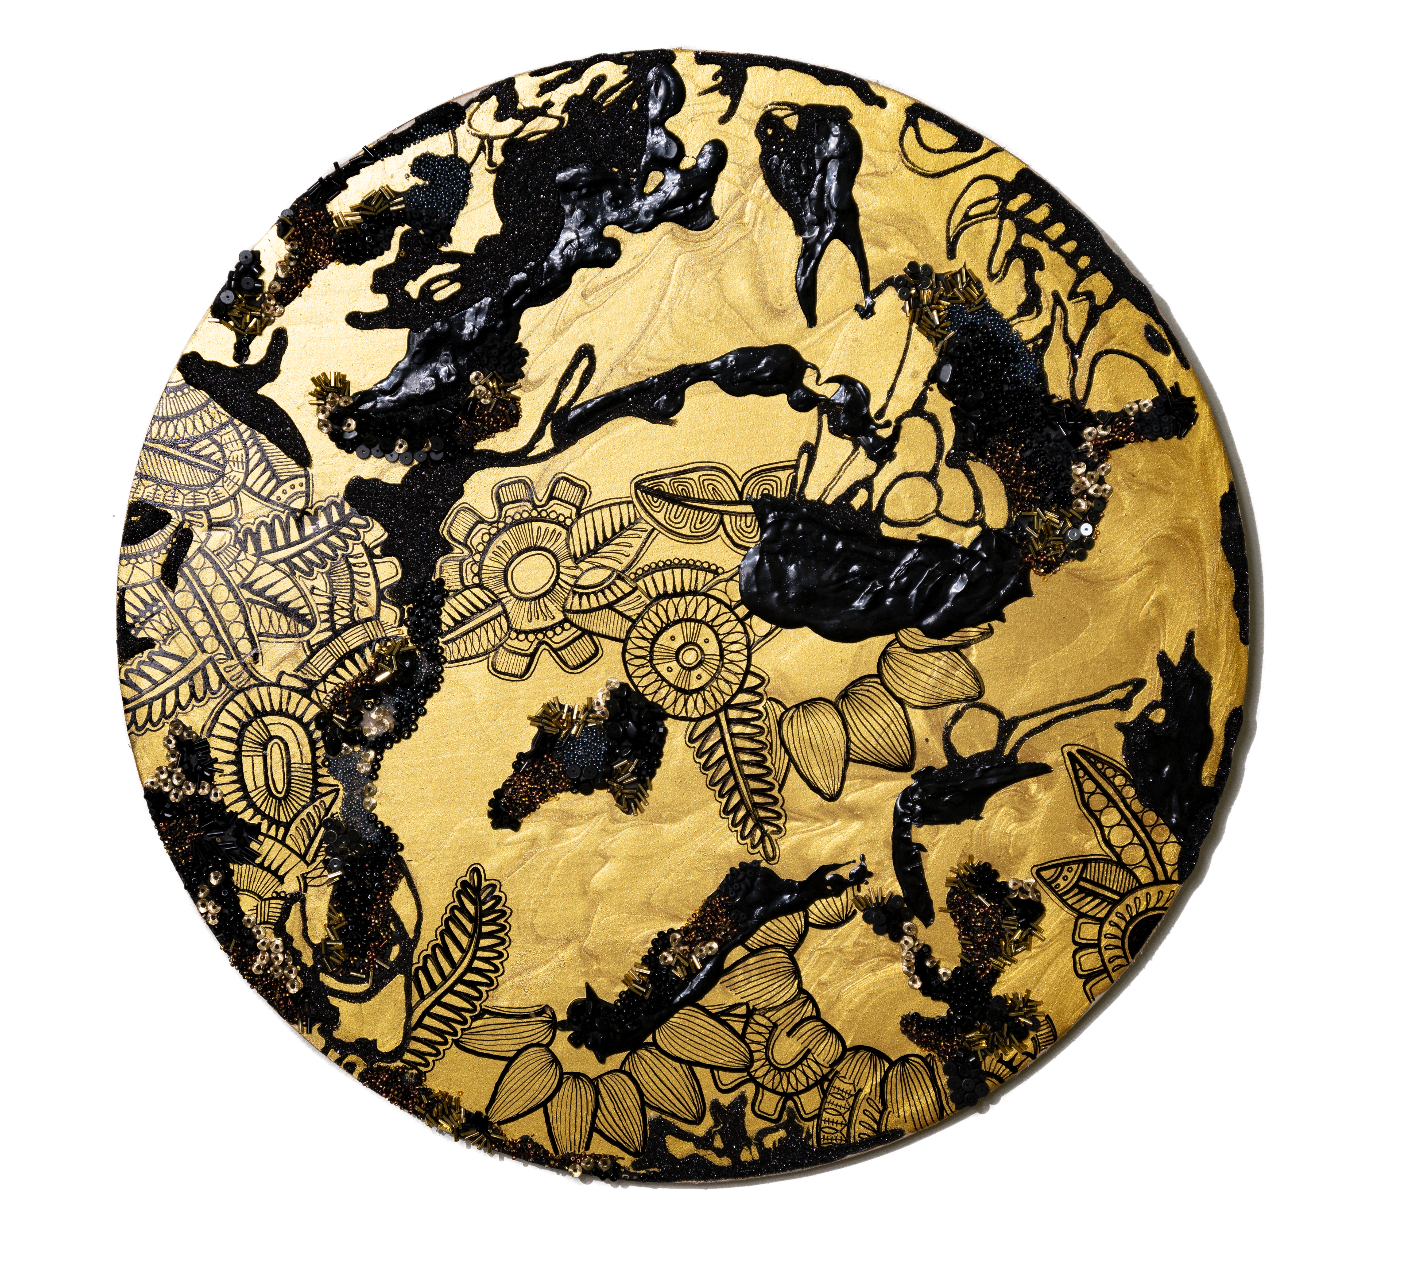  Gold Moon  2023  oil, acrylic, glitter, and glass seed beads on birch  20 diameter inches 